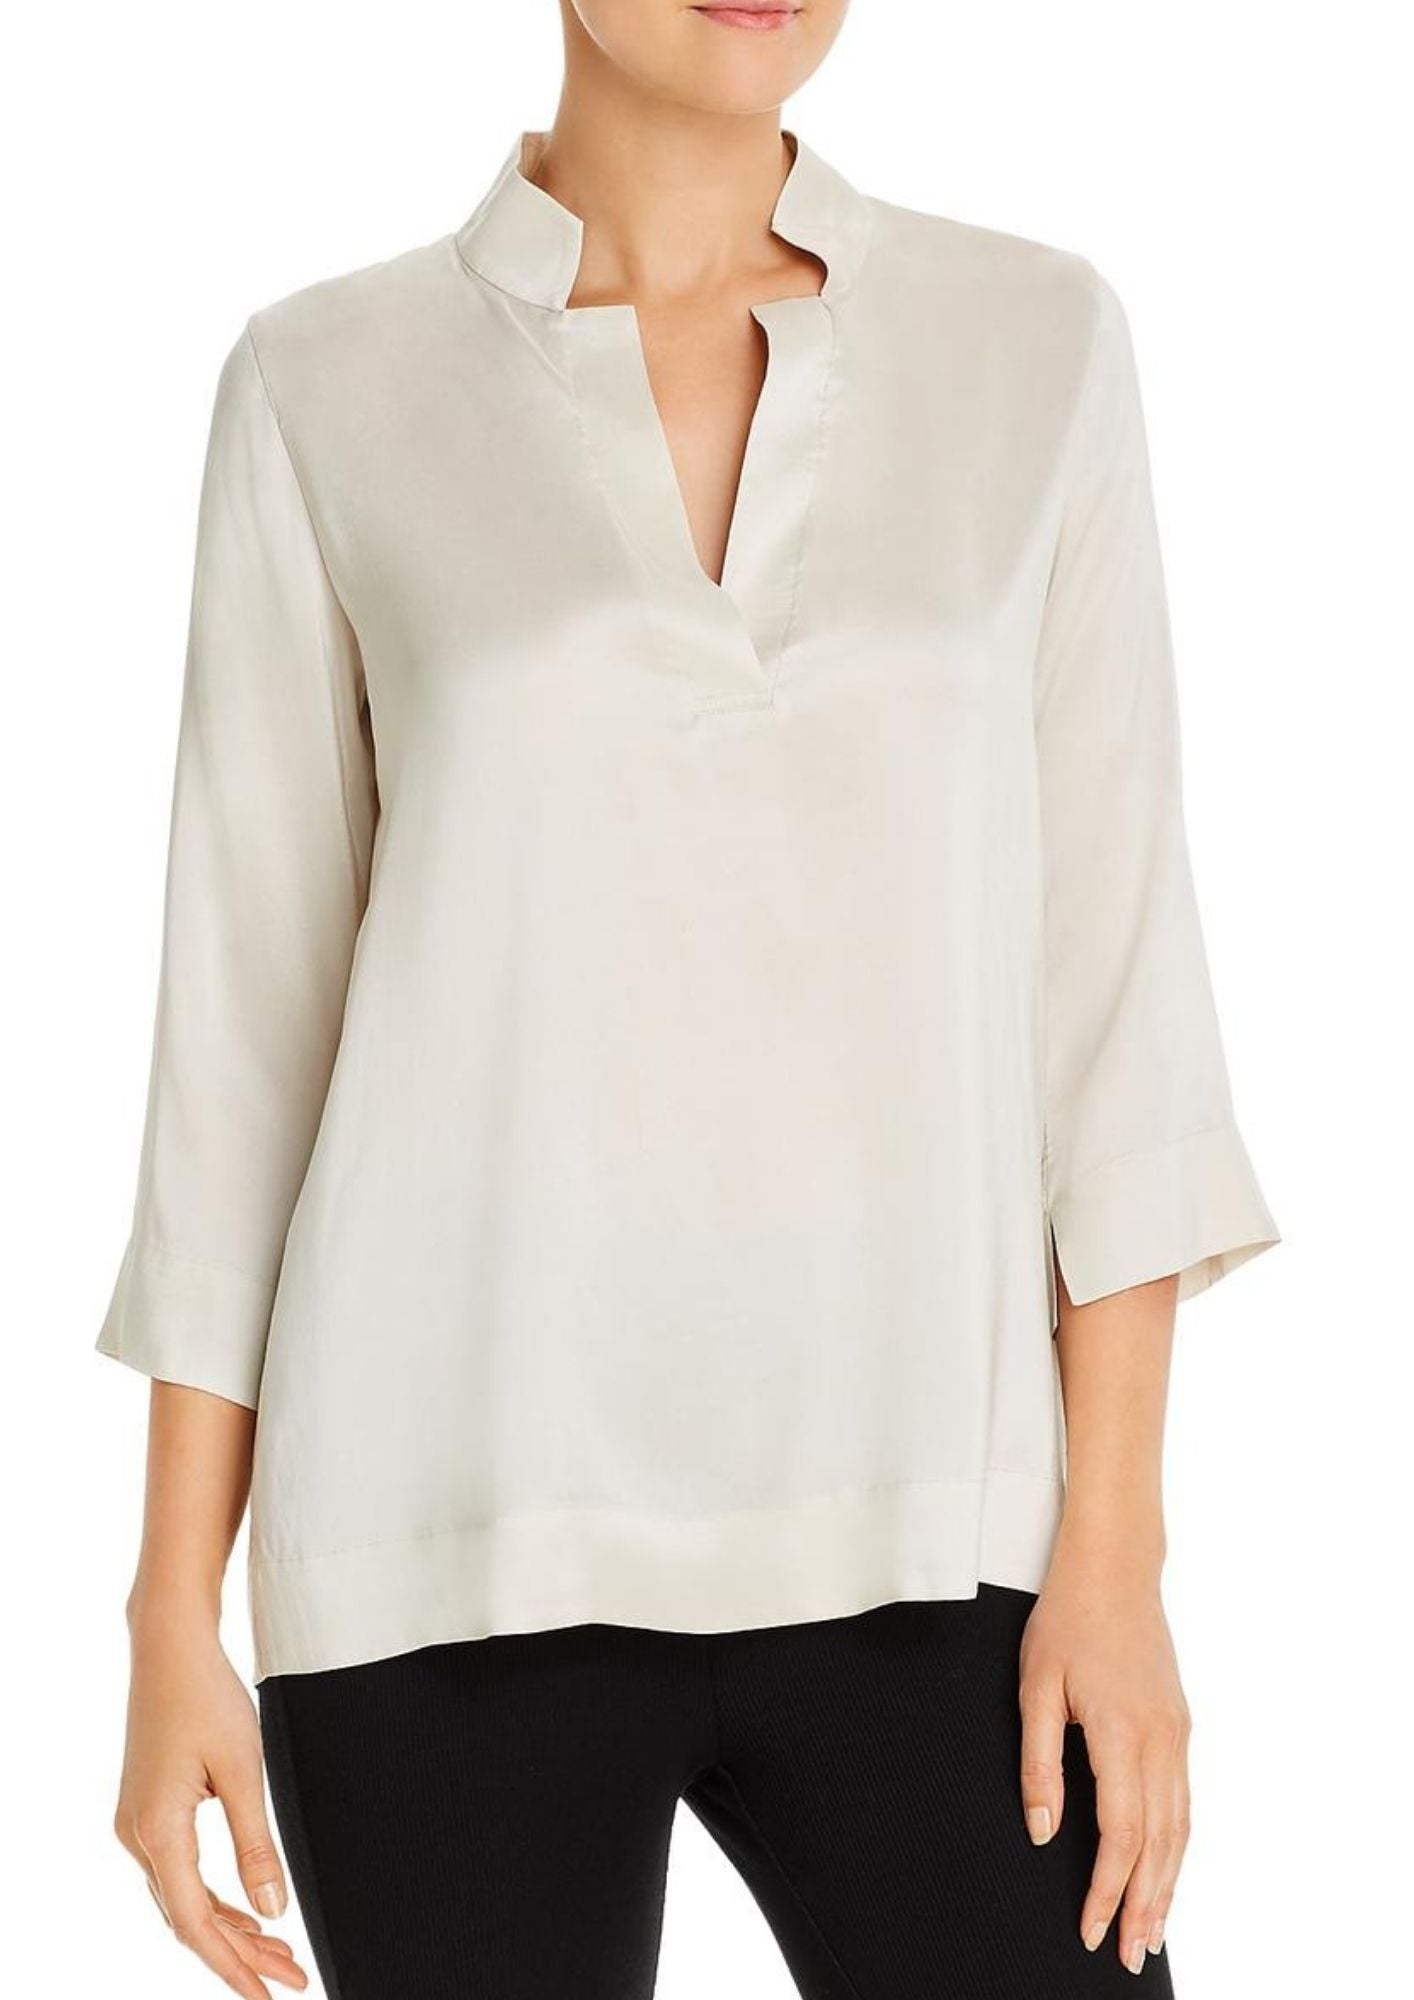 Stand Collar White Top – Styched Fashion